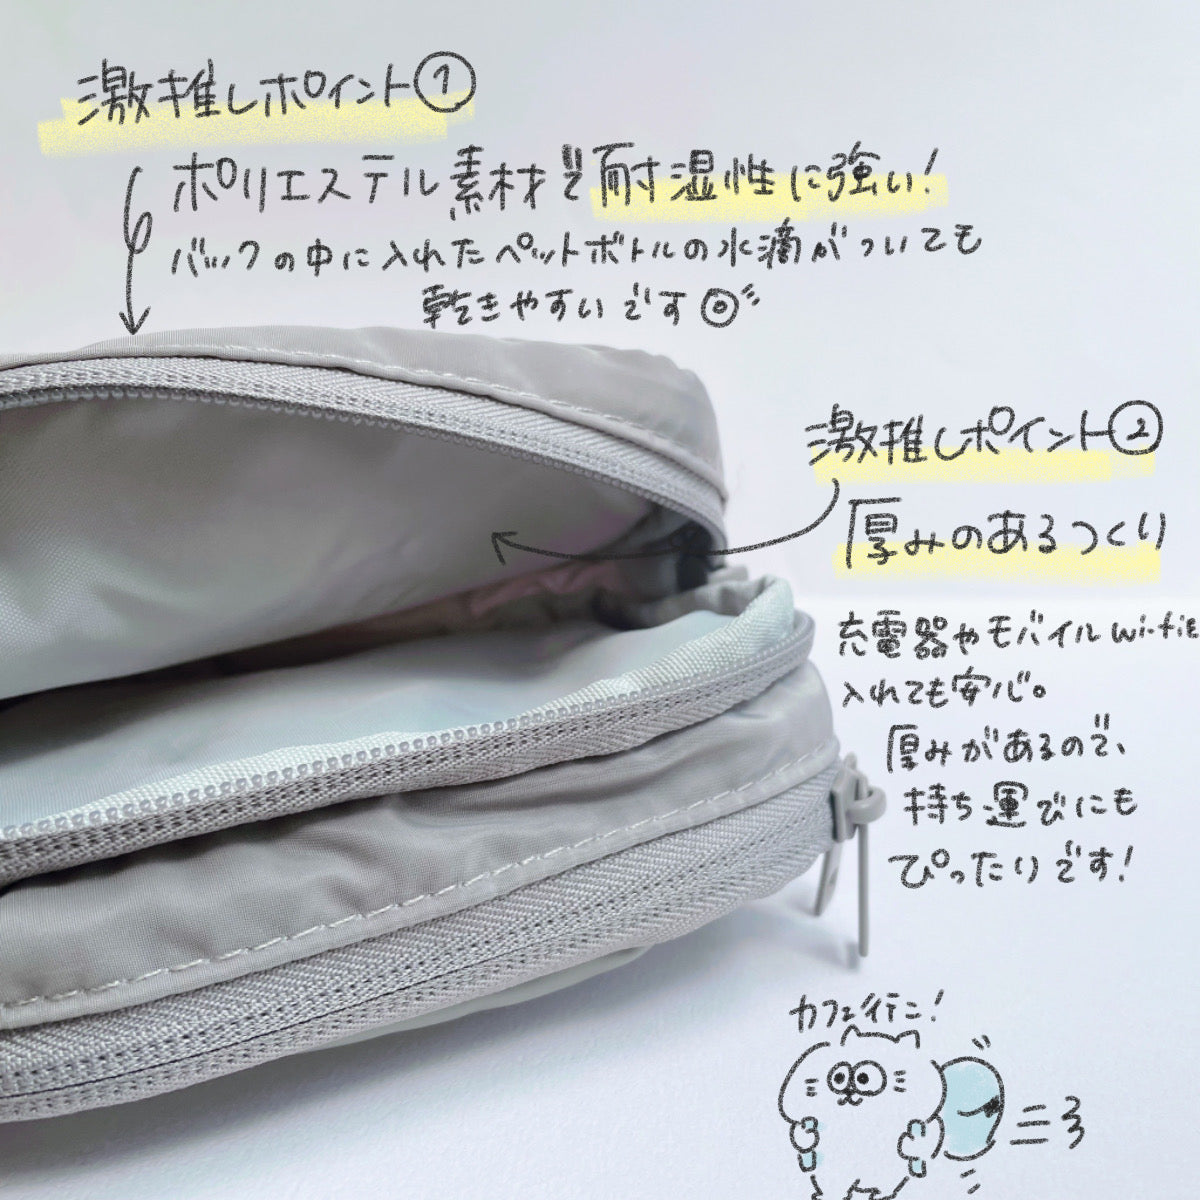 Gadget pouch that can be seen inside